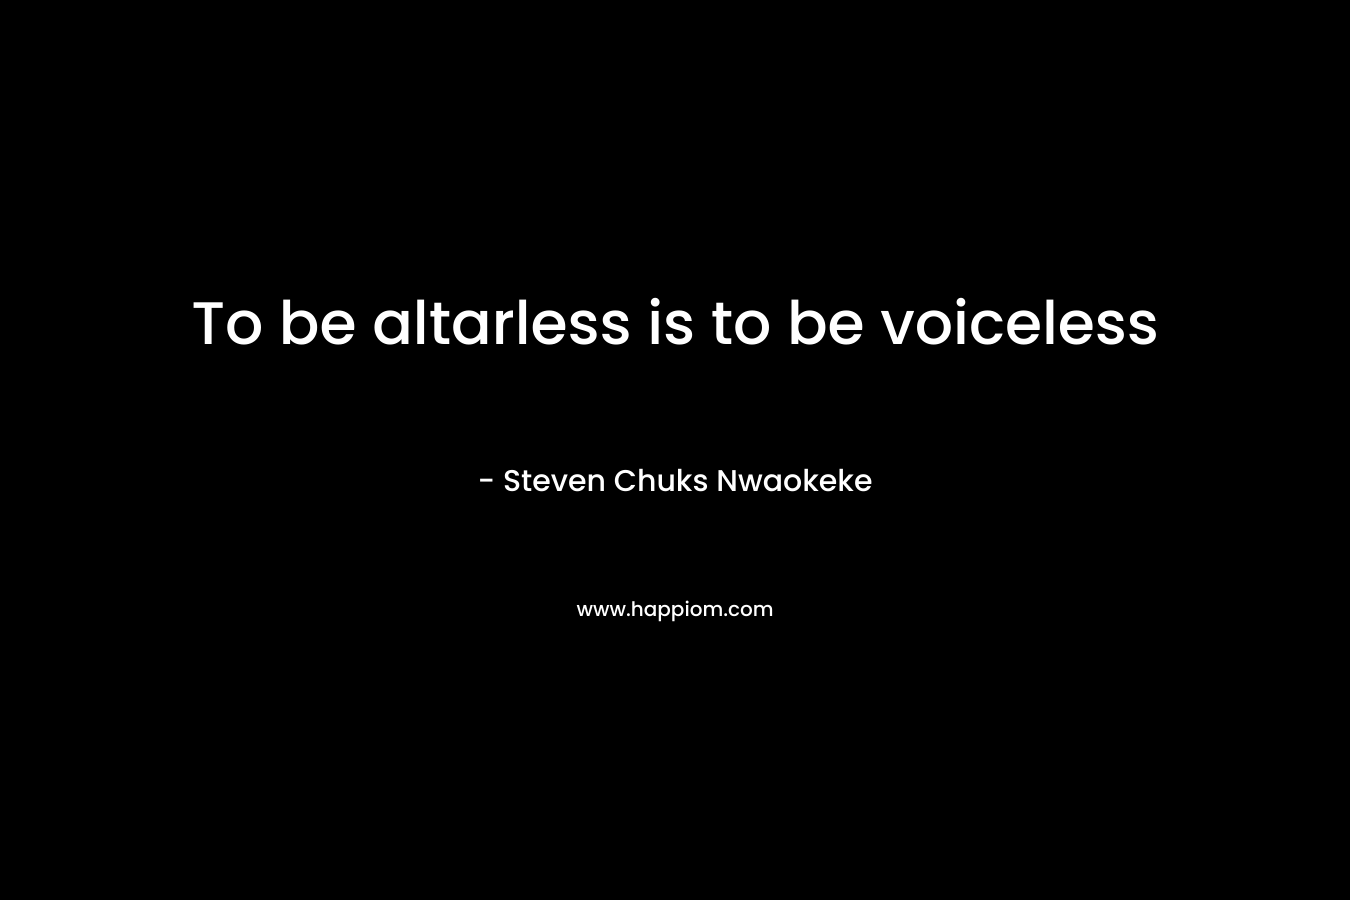 To be altarless is to be voiceless